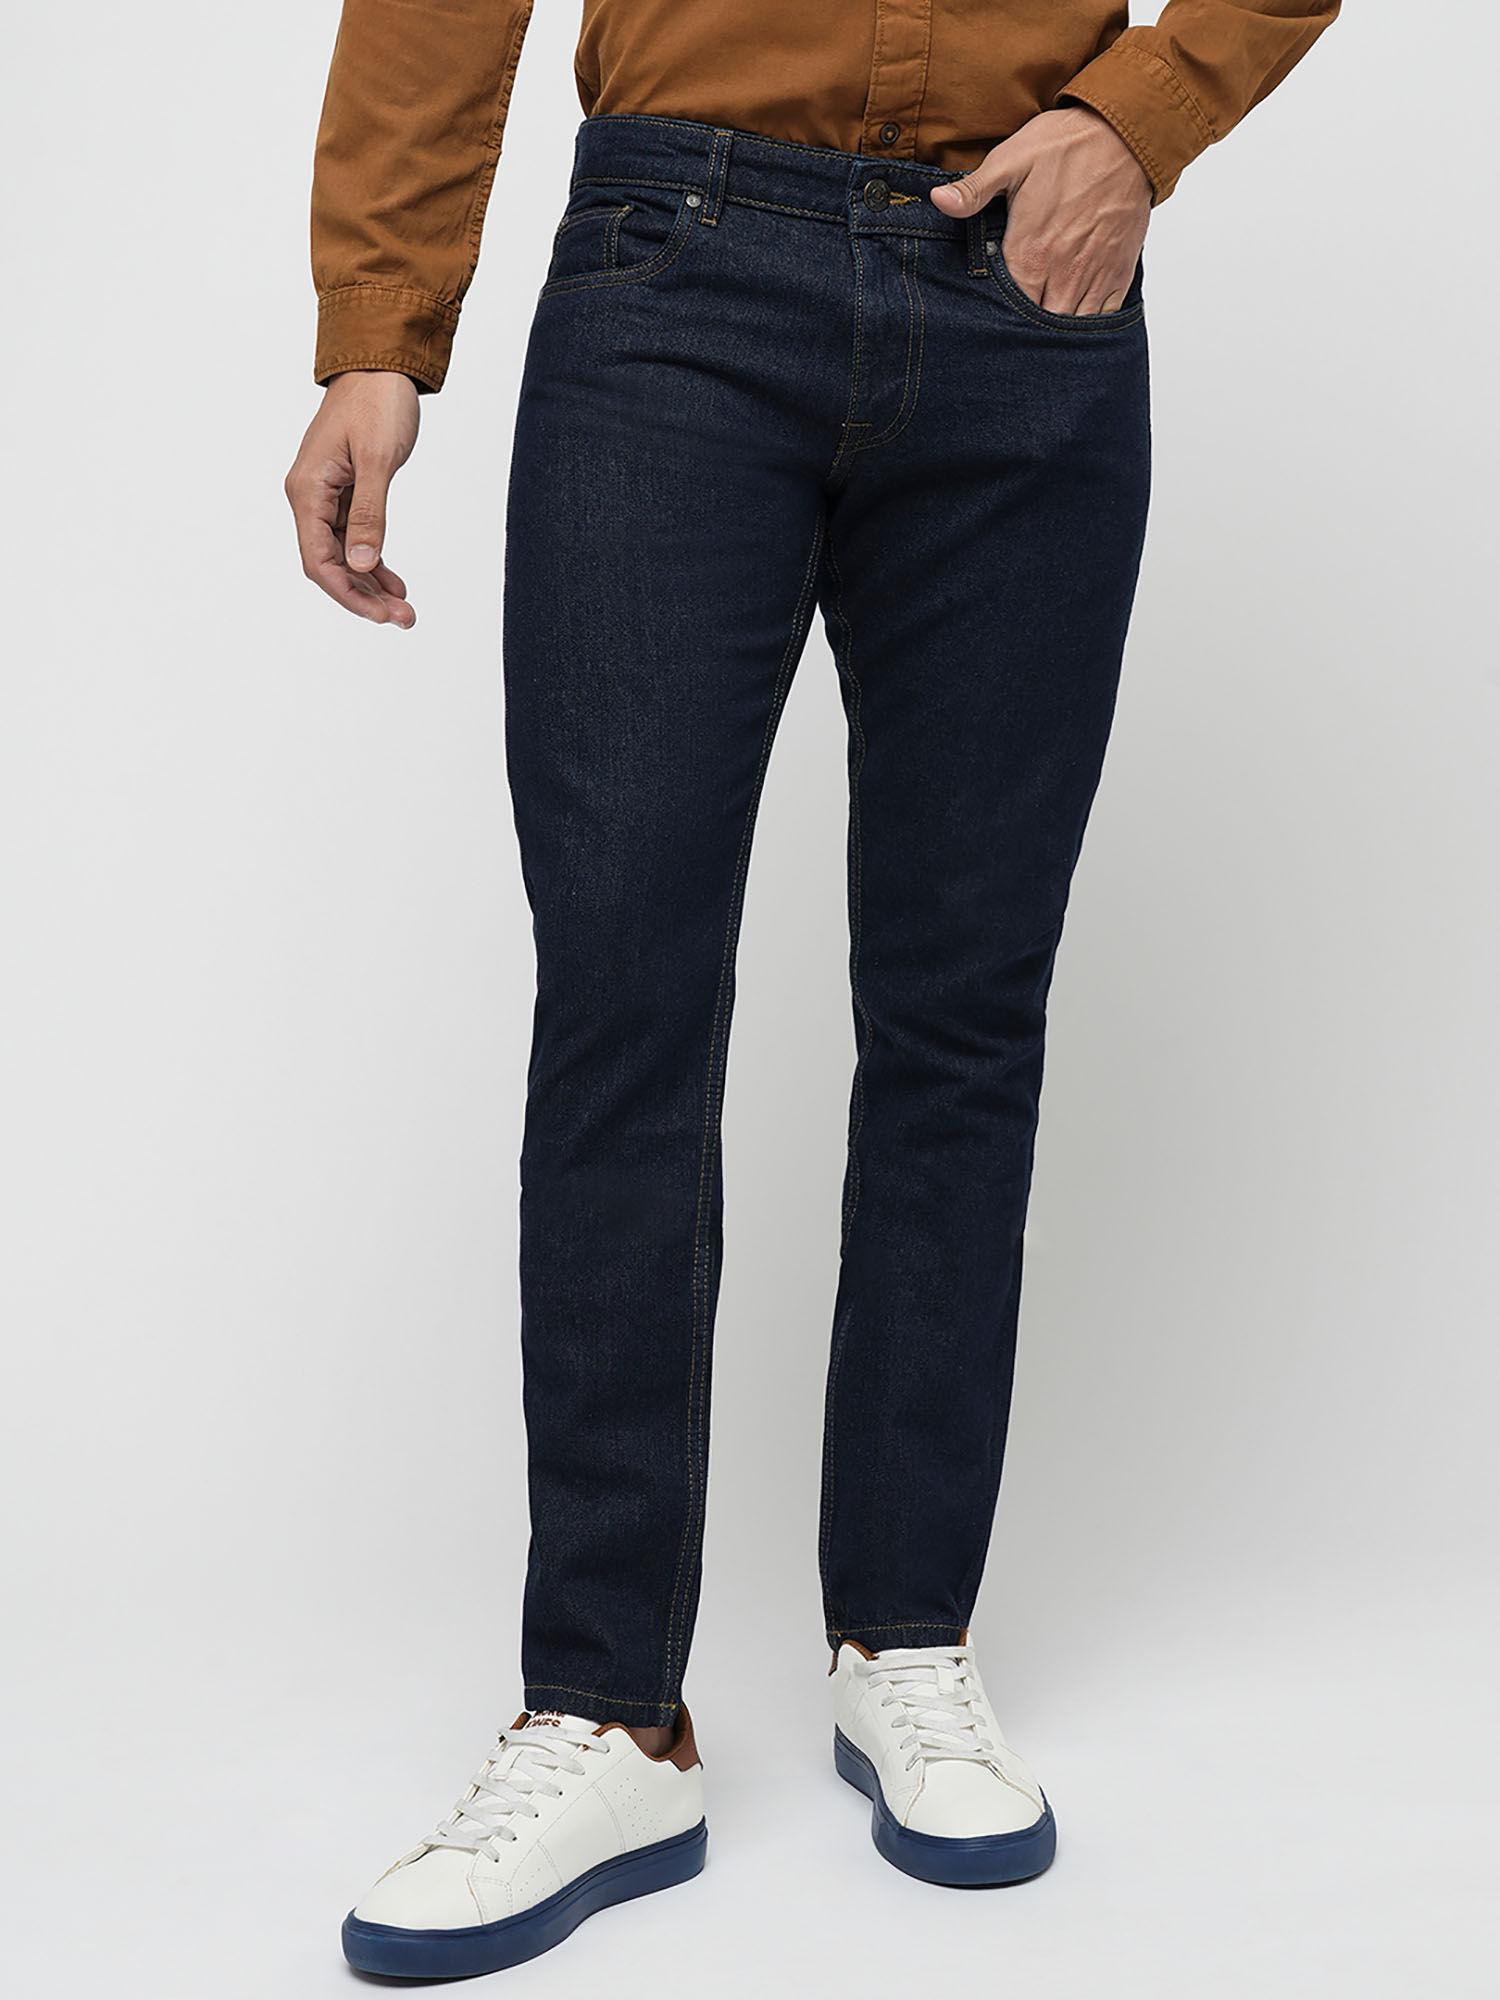 navy-blue-slim-fit-non-stretch-jeans